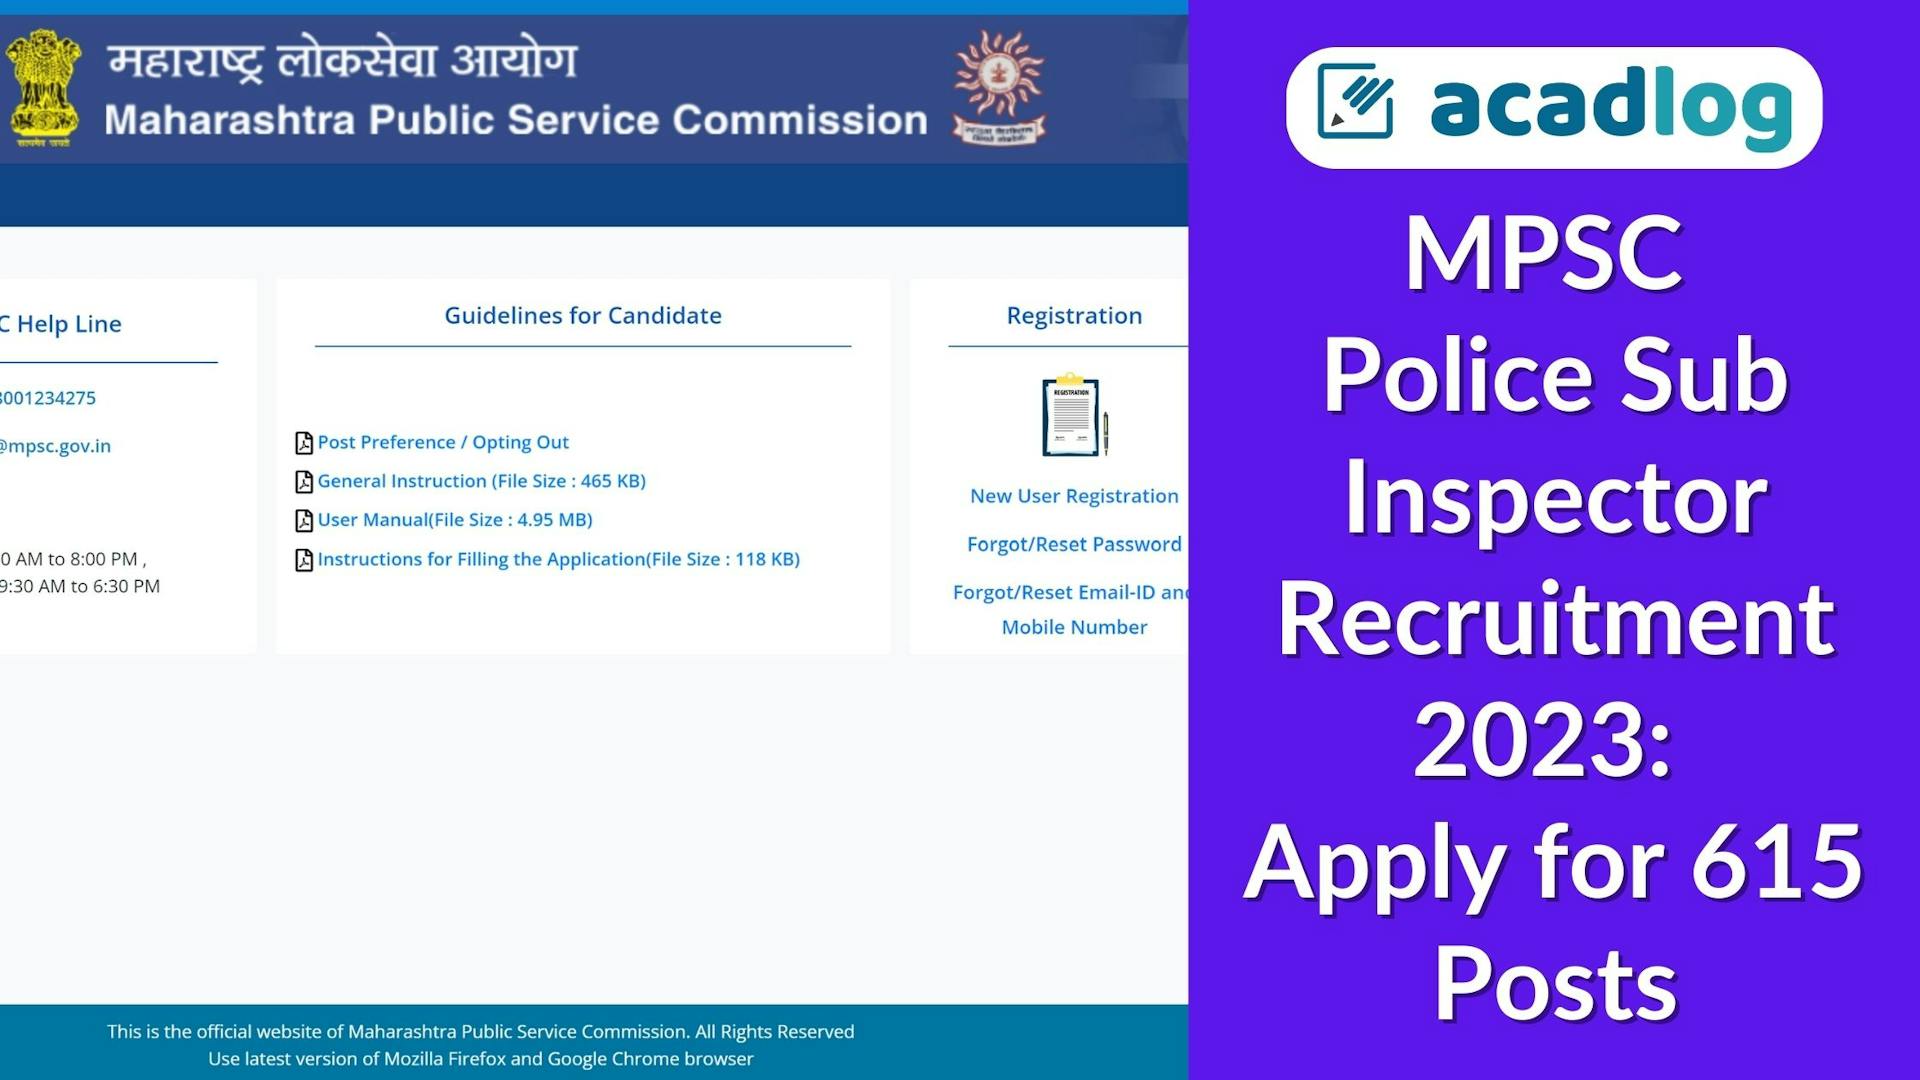 MPSC Police Sub Inspector Recruitment 2023: Apply for 615 Posts